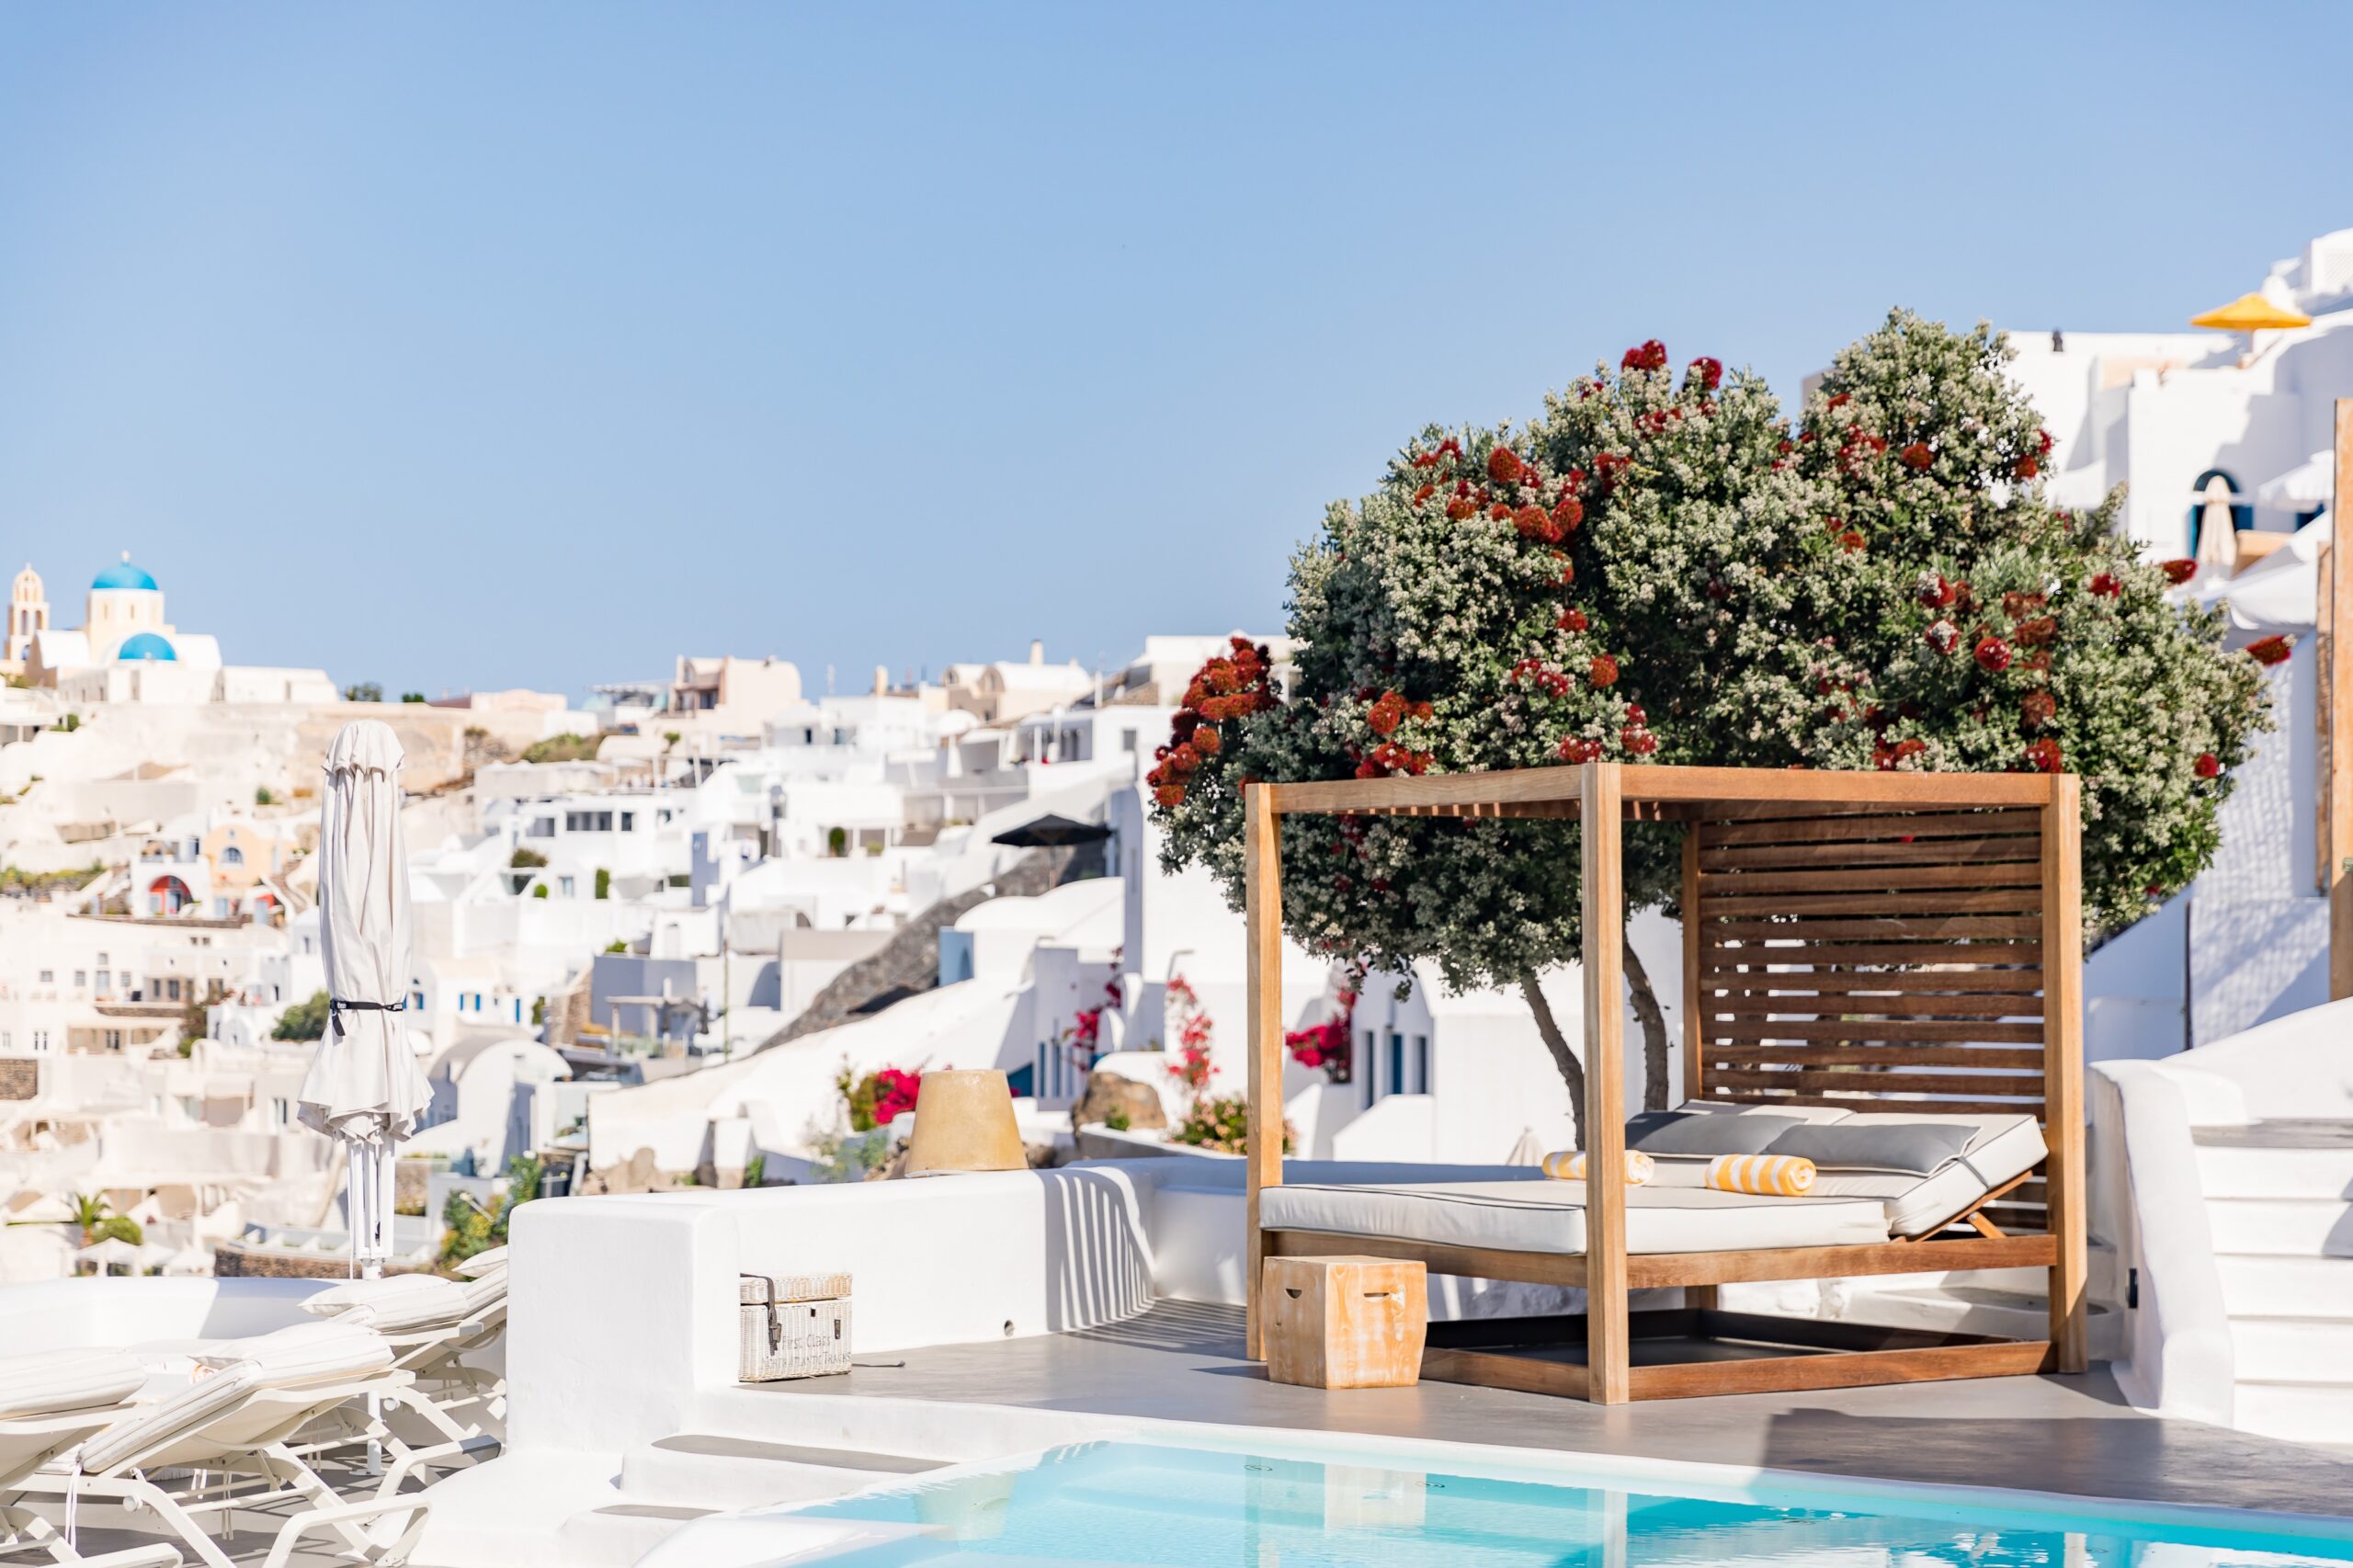 Find the luxurious side of Santorini at the Katikies Hotels